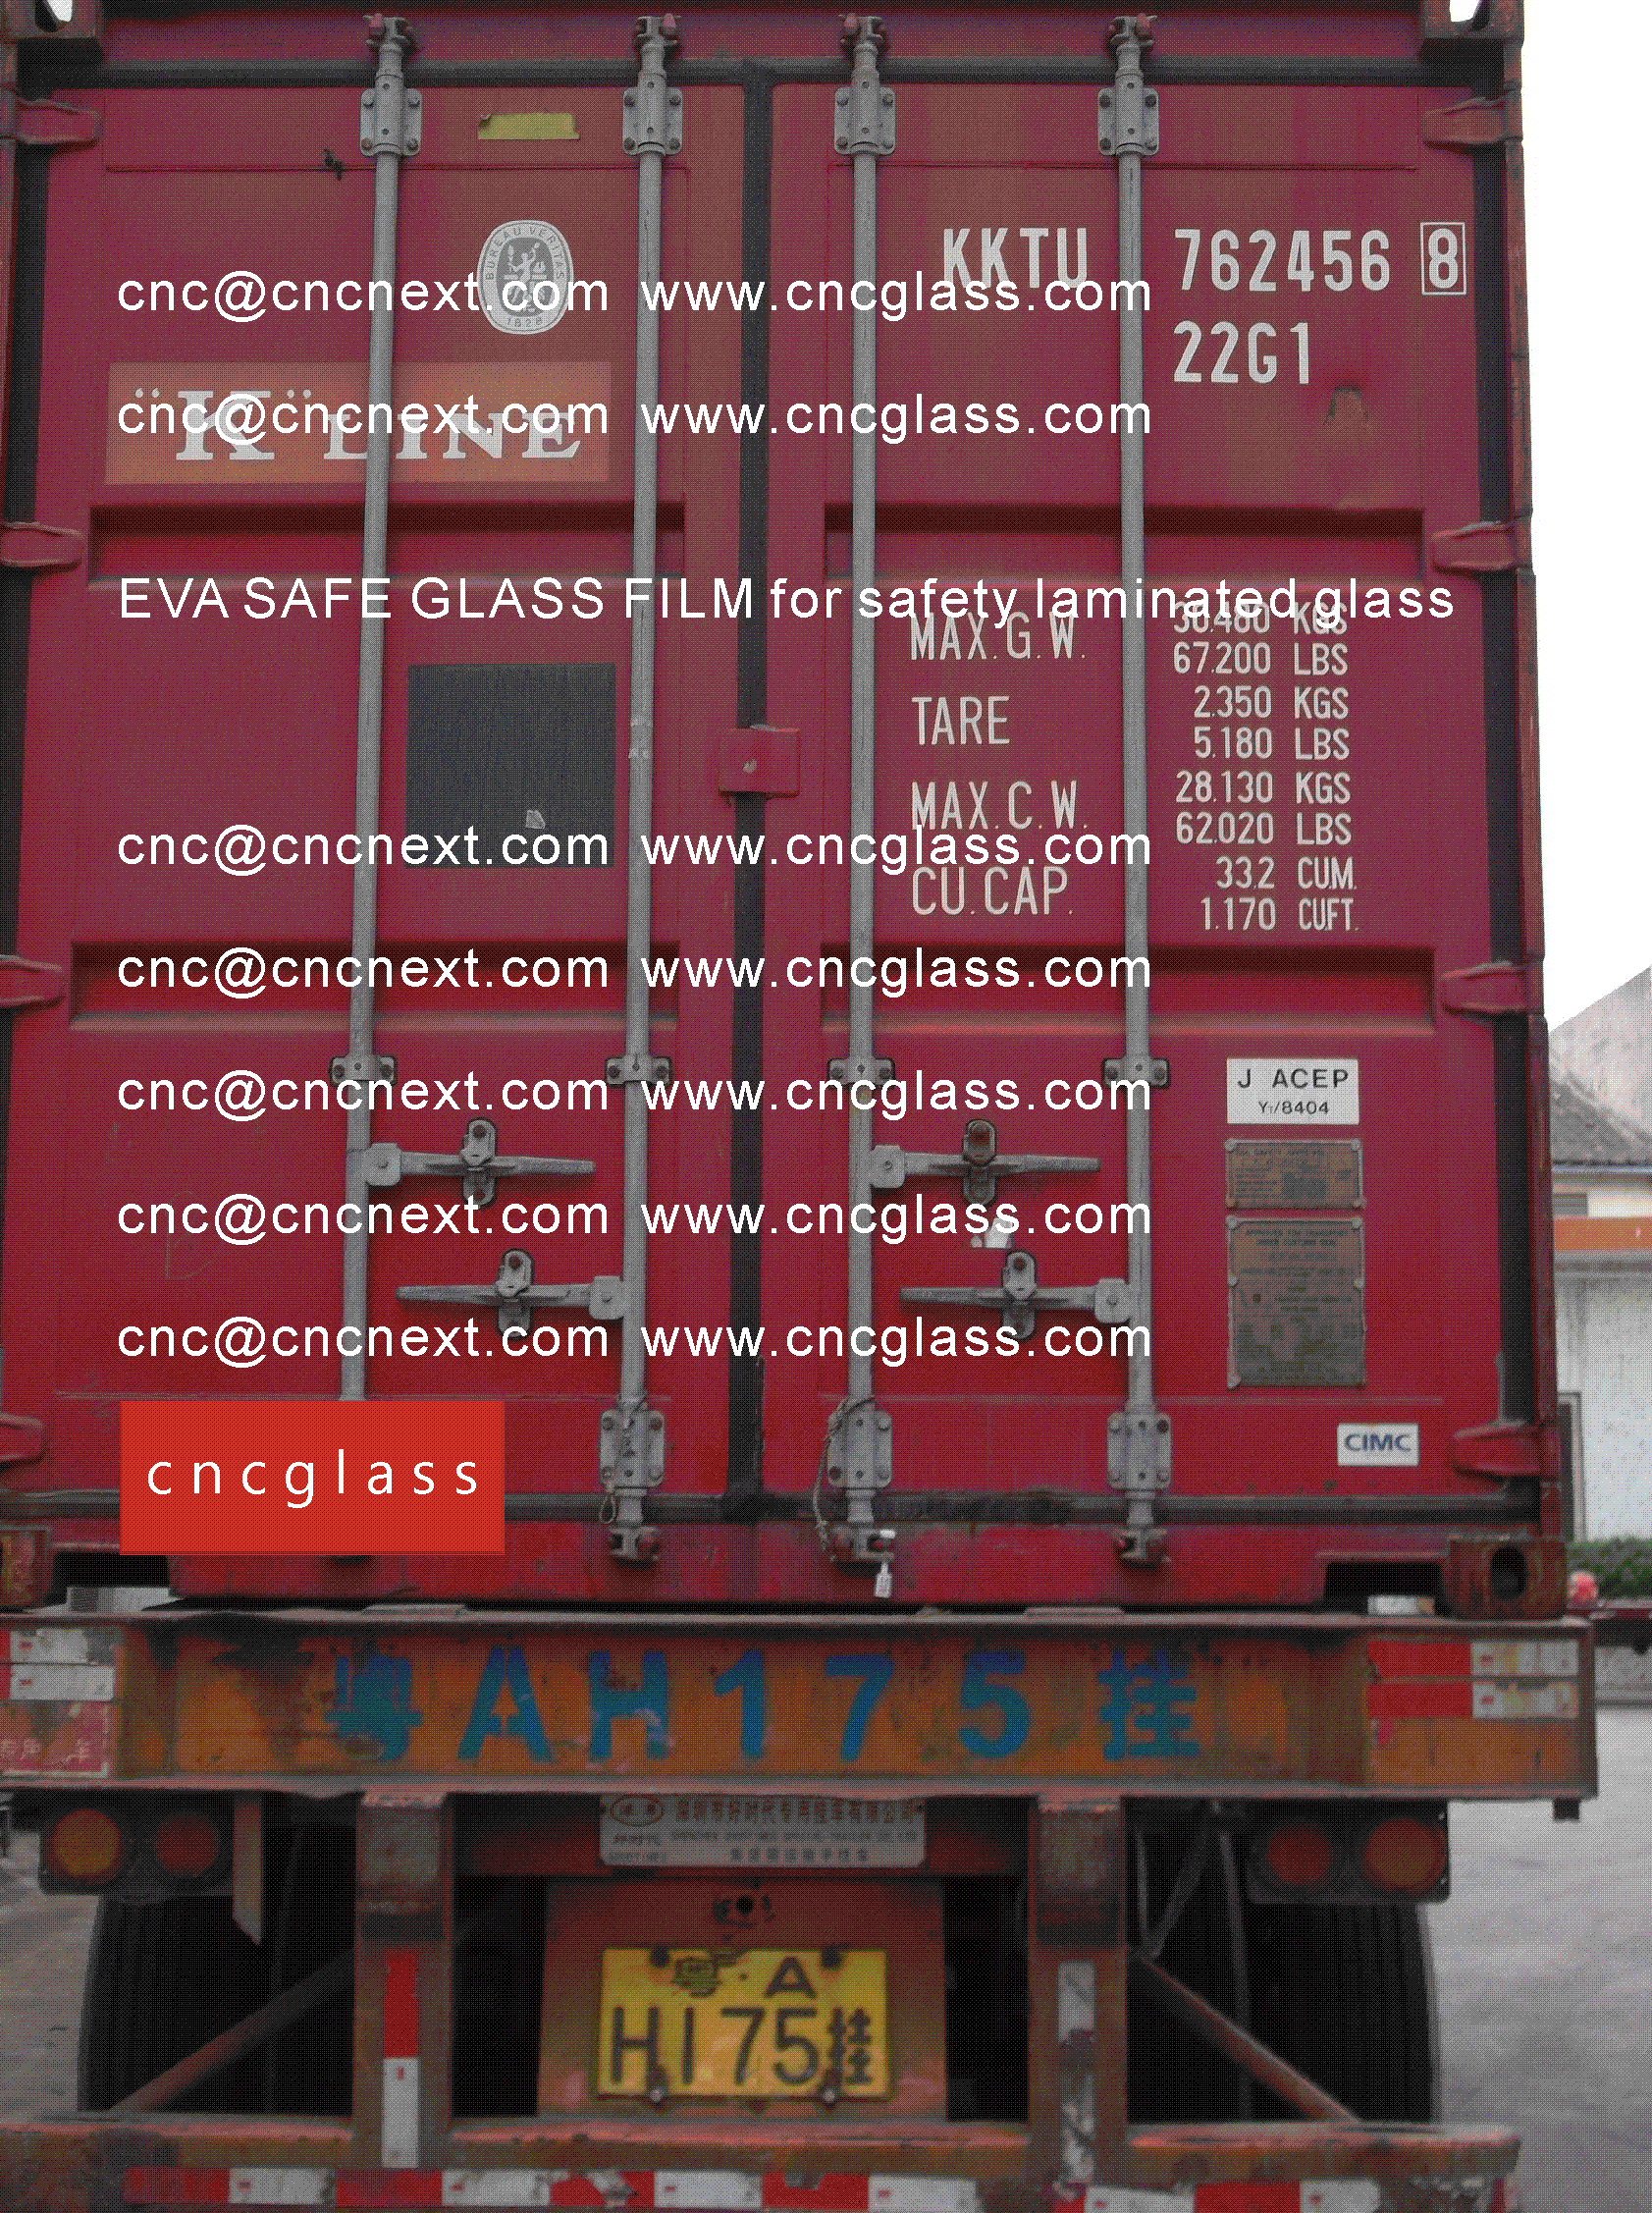 007 EVA SAFE GLASS FILM LOADING CONTAINER (SAFETY LAMINATED GLASS)